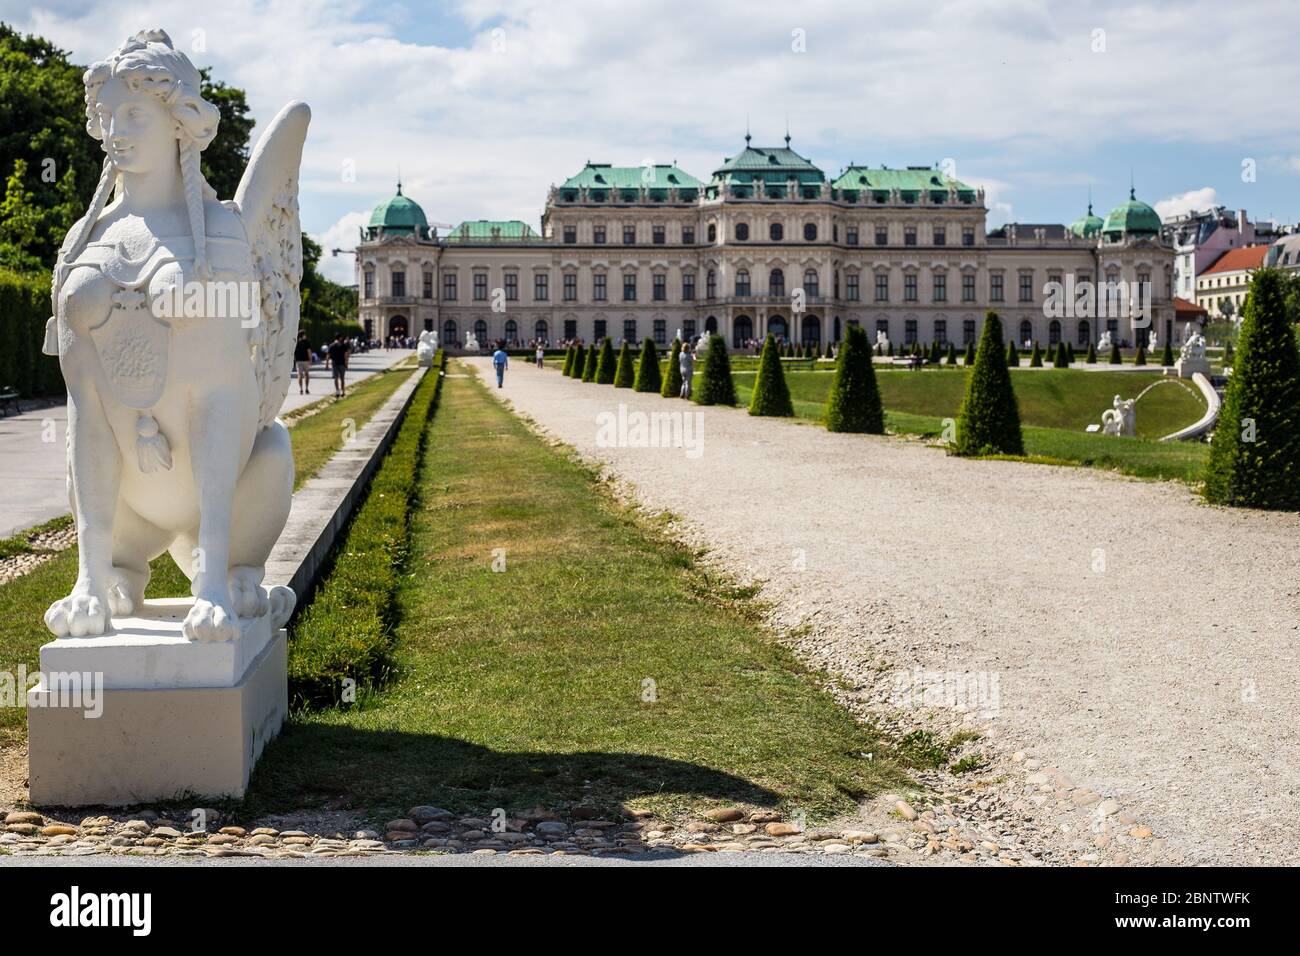 Vienna, Austria - June 19, 2018: View of Sphinx Sculpture and Upper Belvedere Palace and Garden on a Summer Day Stock Photo